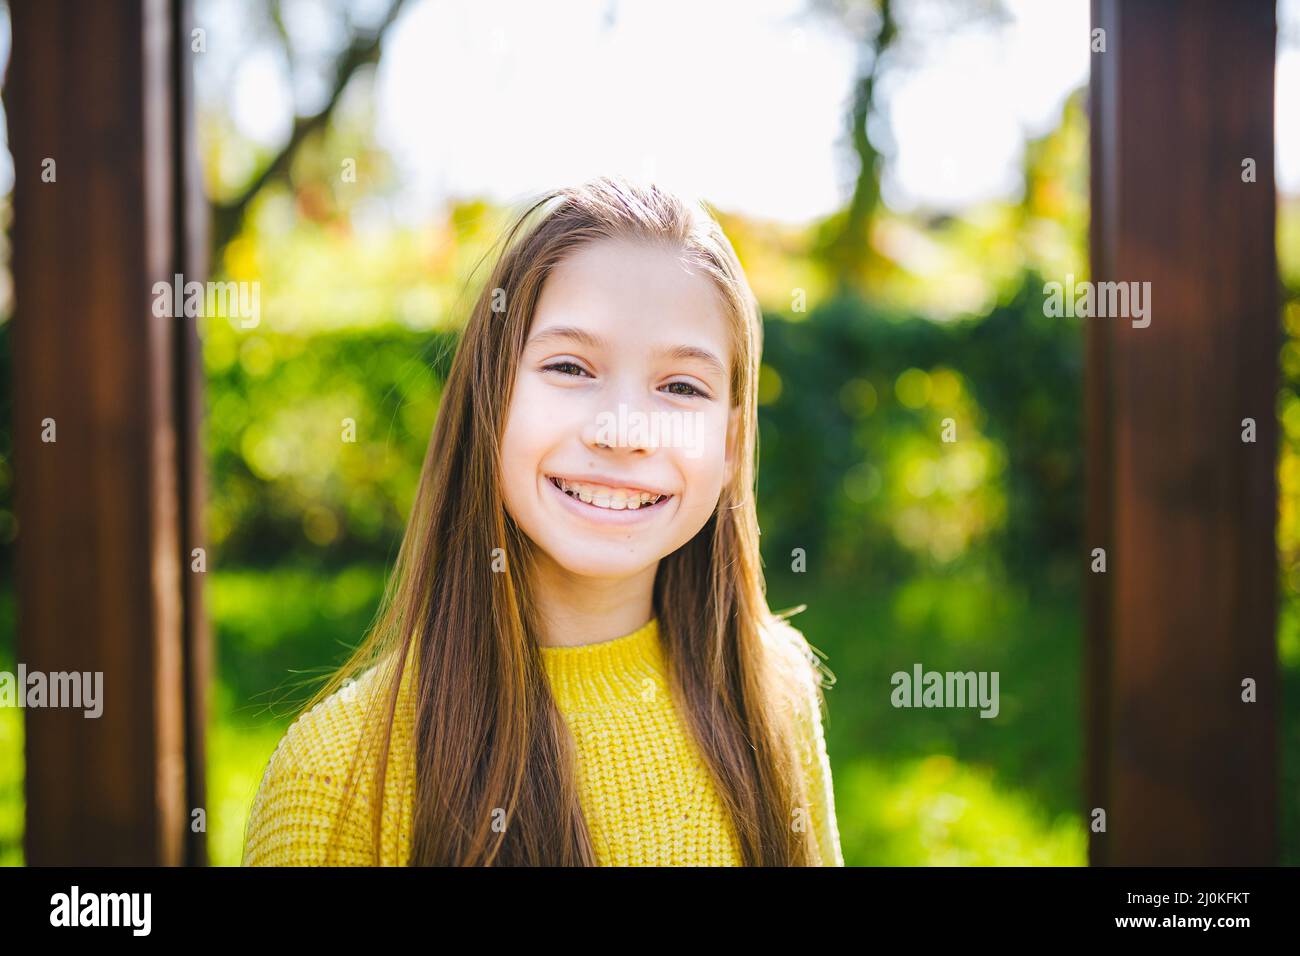 Pretty teenage girl wearing braces smiling cheerfully dressed in bright yellow clothes outdoors. Cute and happy teen girl with b Stock Photo